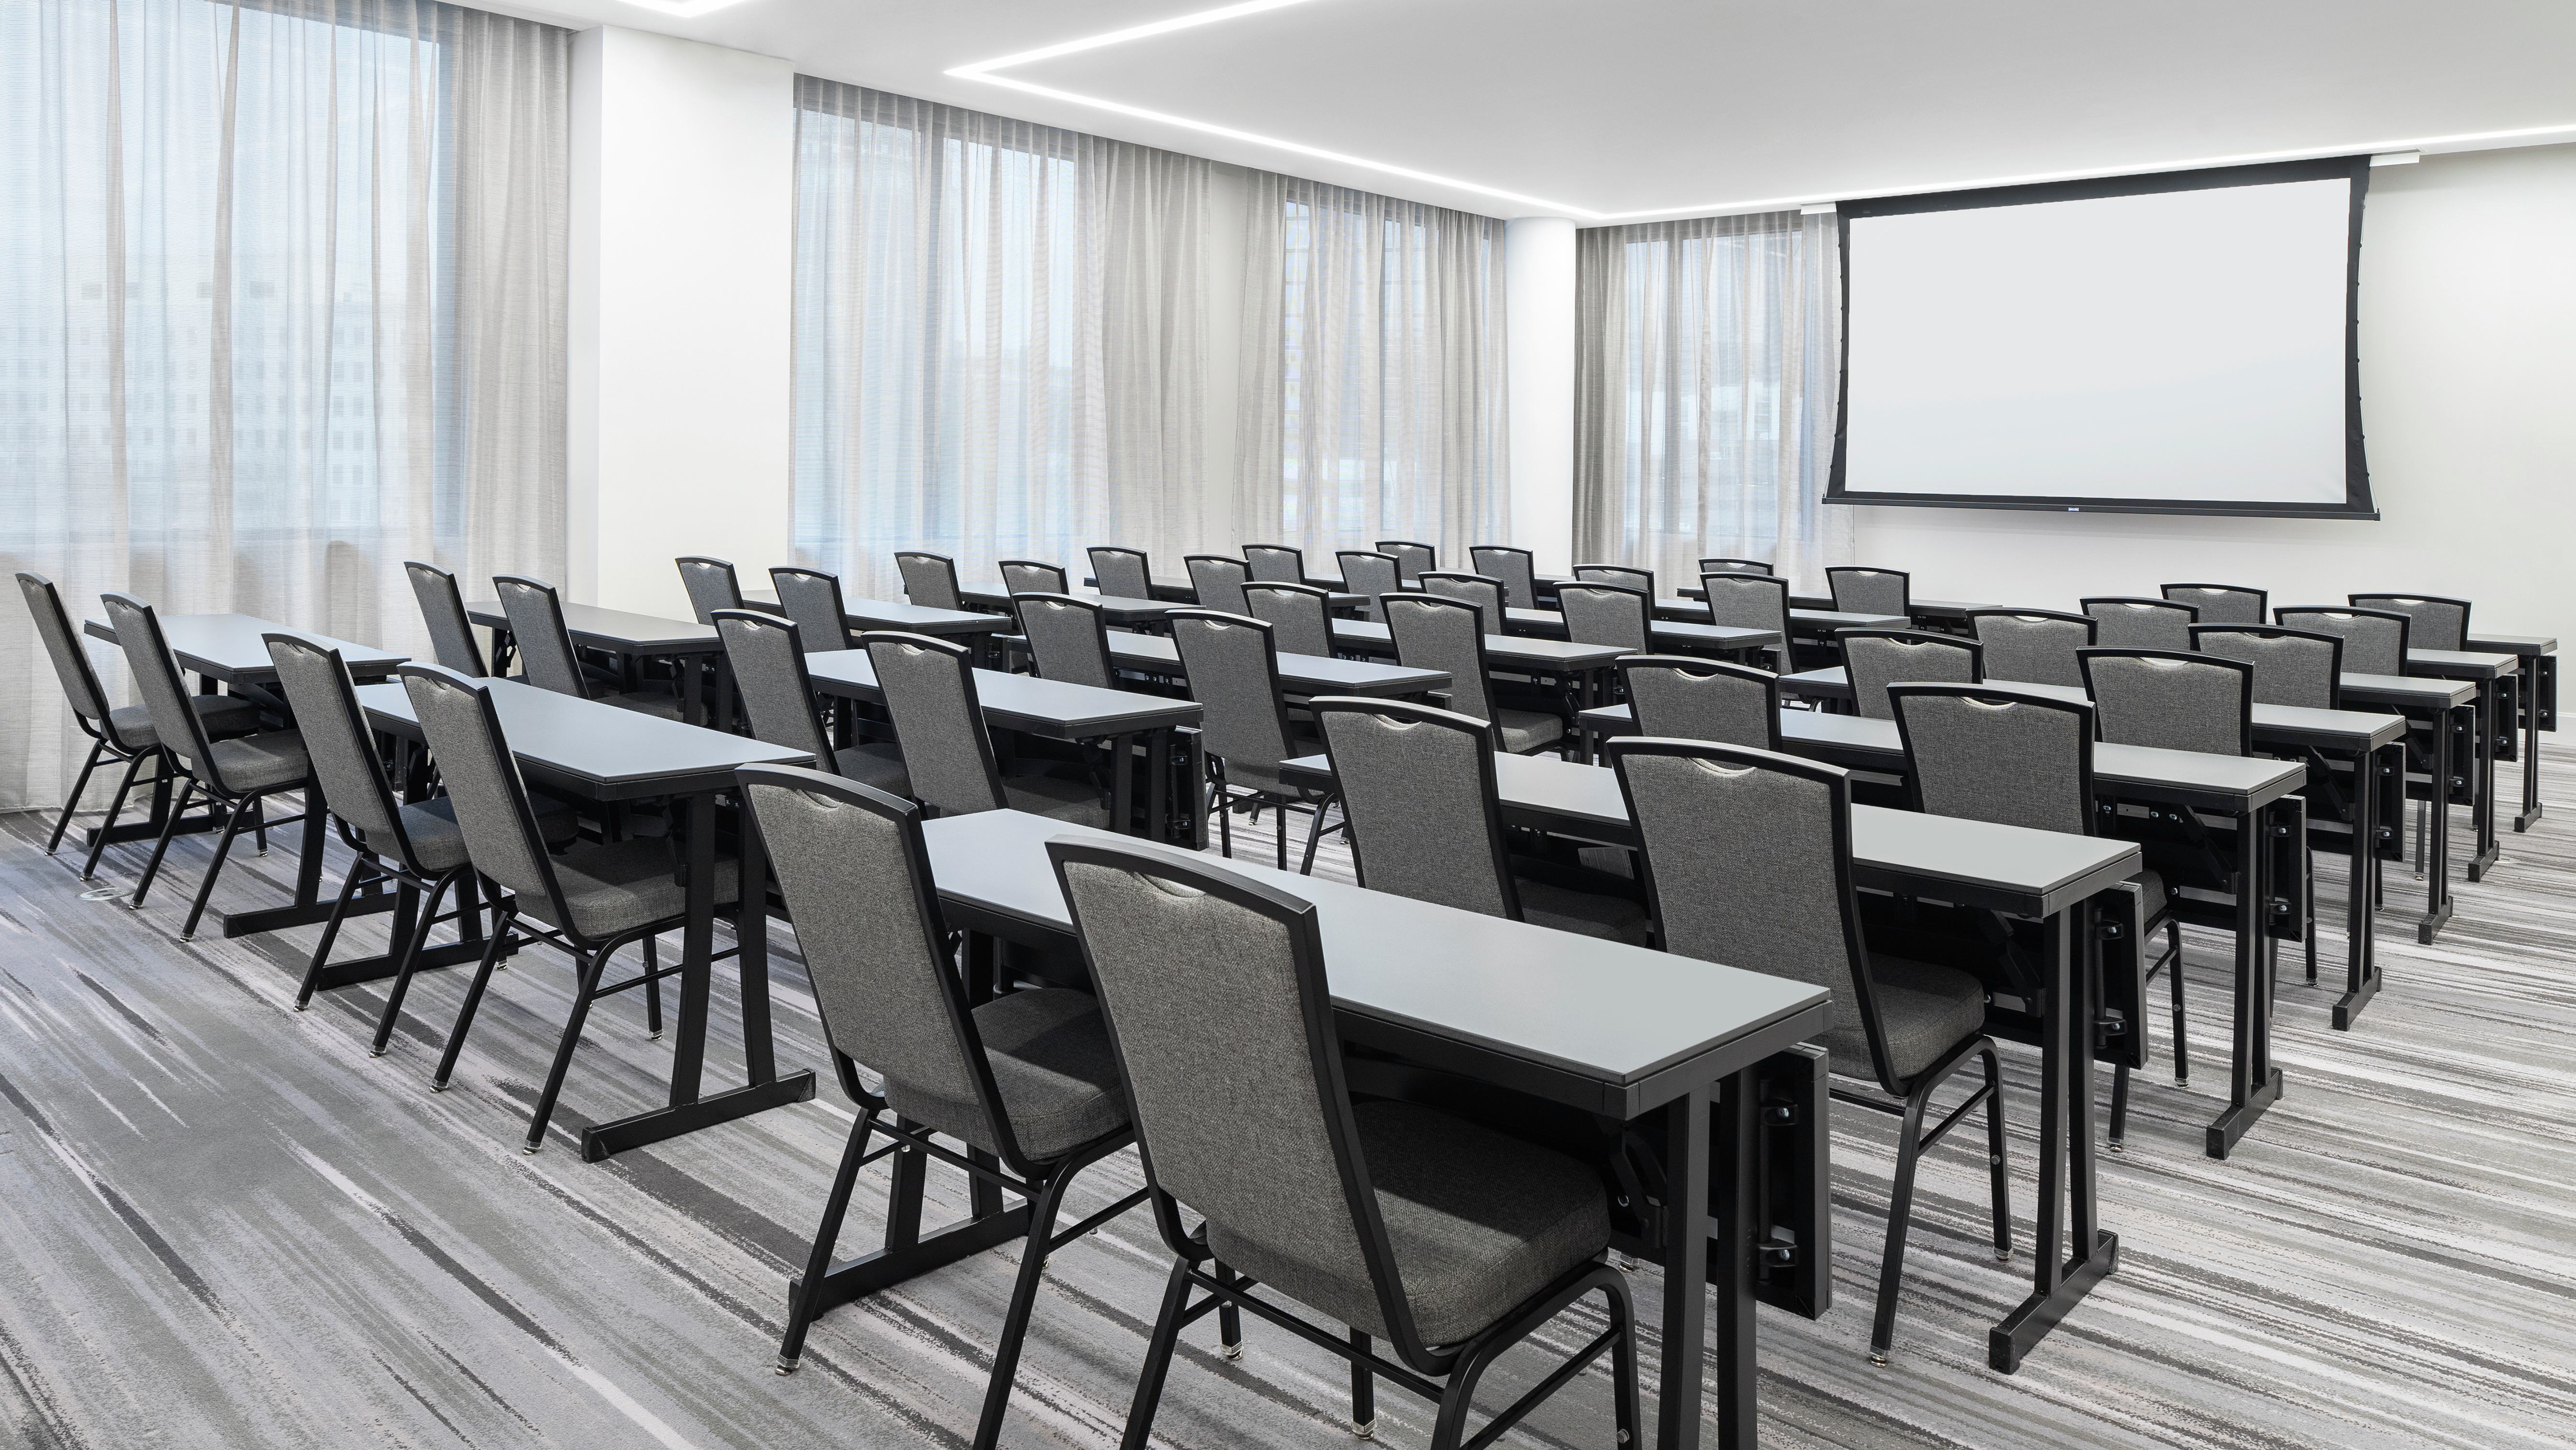 Meeting Room Set Up Classroom Style with Tables, Chairs, and Projector Screen